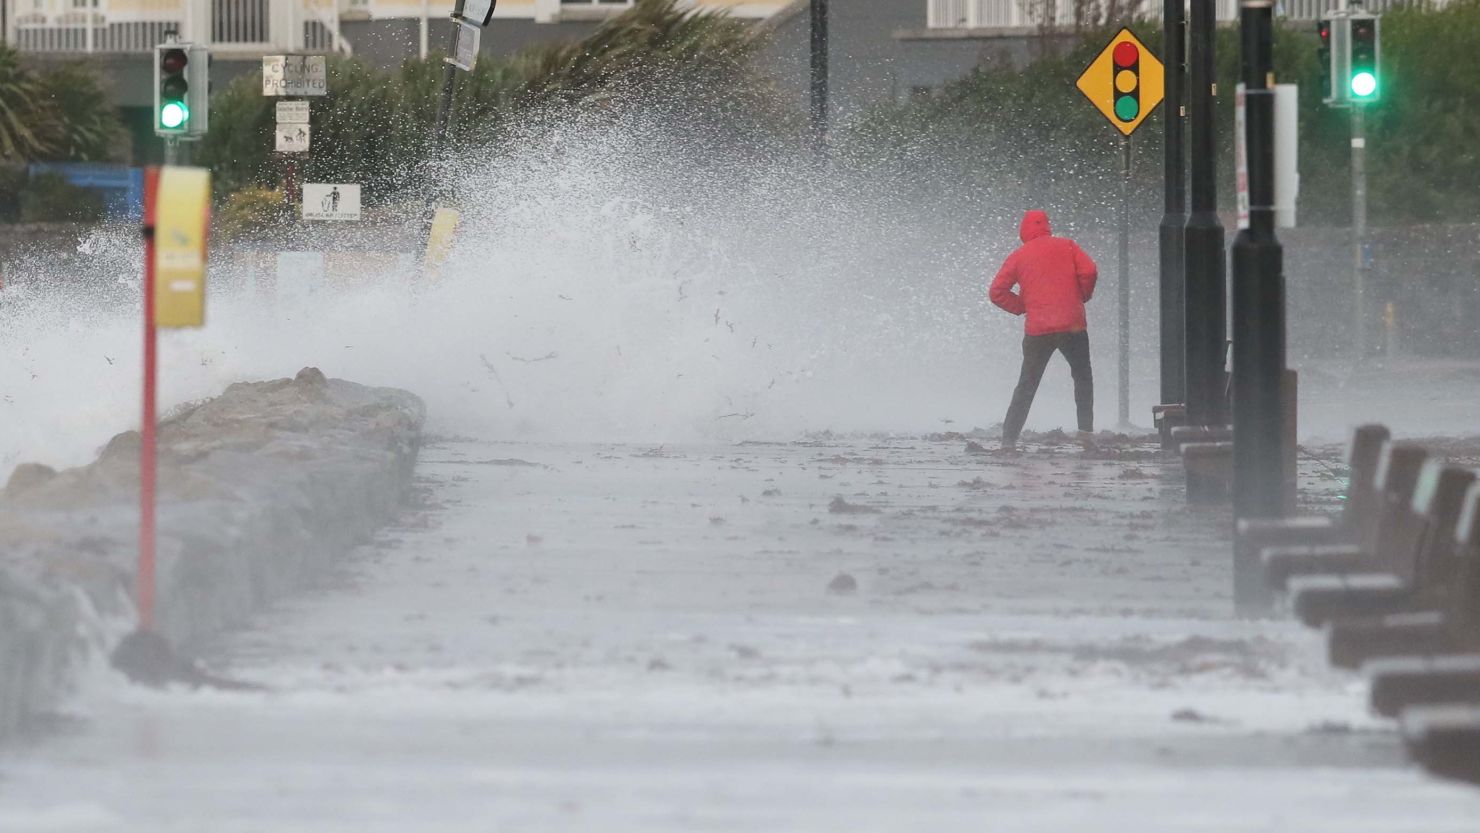 A man avoids the waves at Salthill promenade, County Galway, Ireland, during Storm Callum.